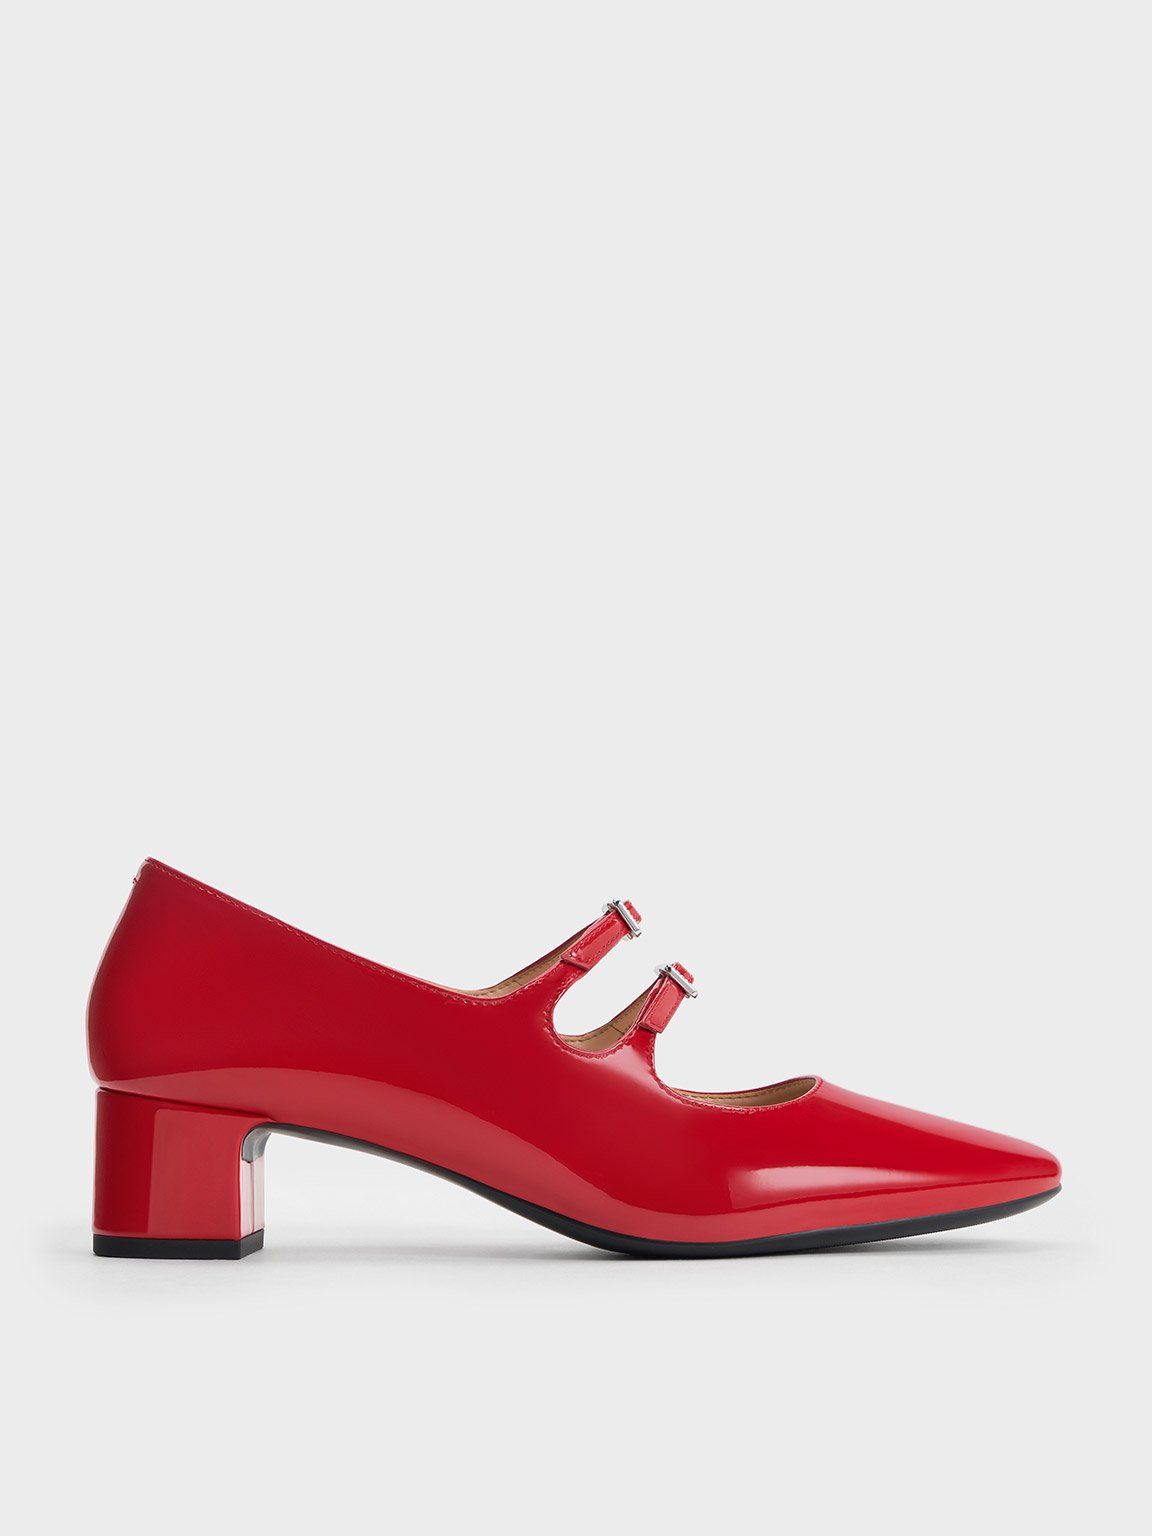 21 Under-$100 Shoes From This Sneaky Editor-Loved Brand | Who What Wear